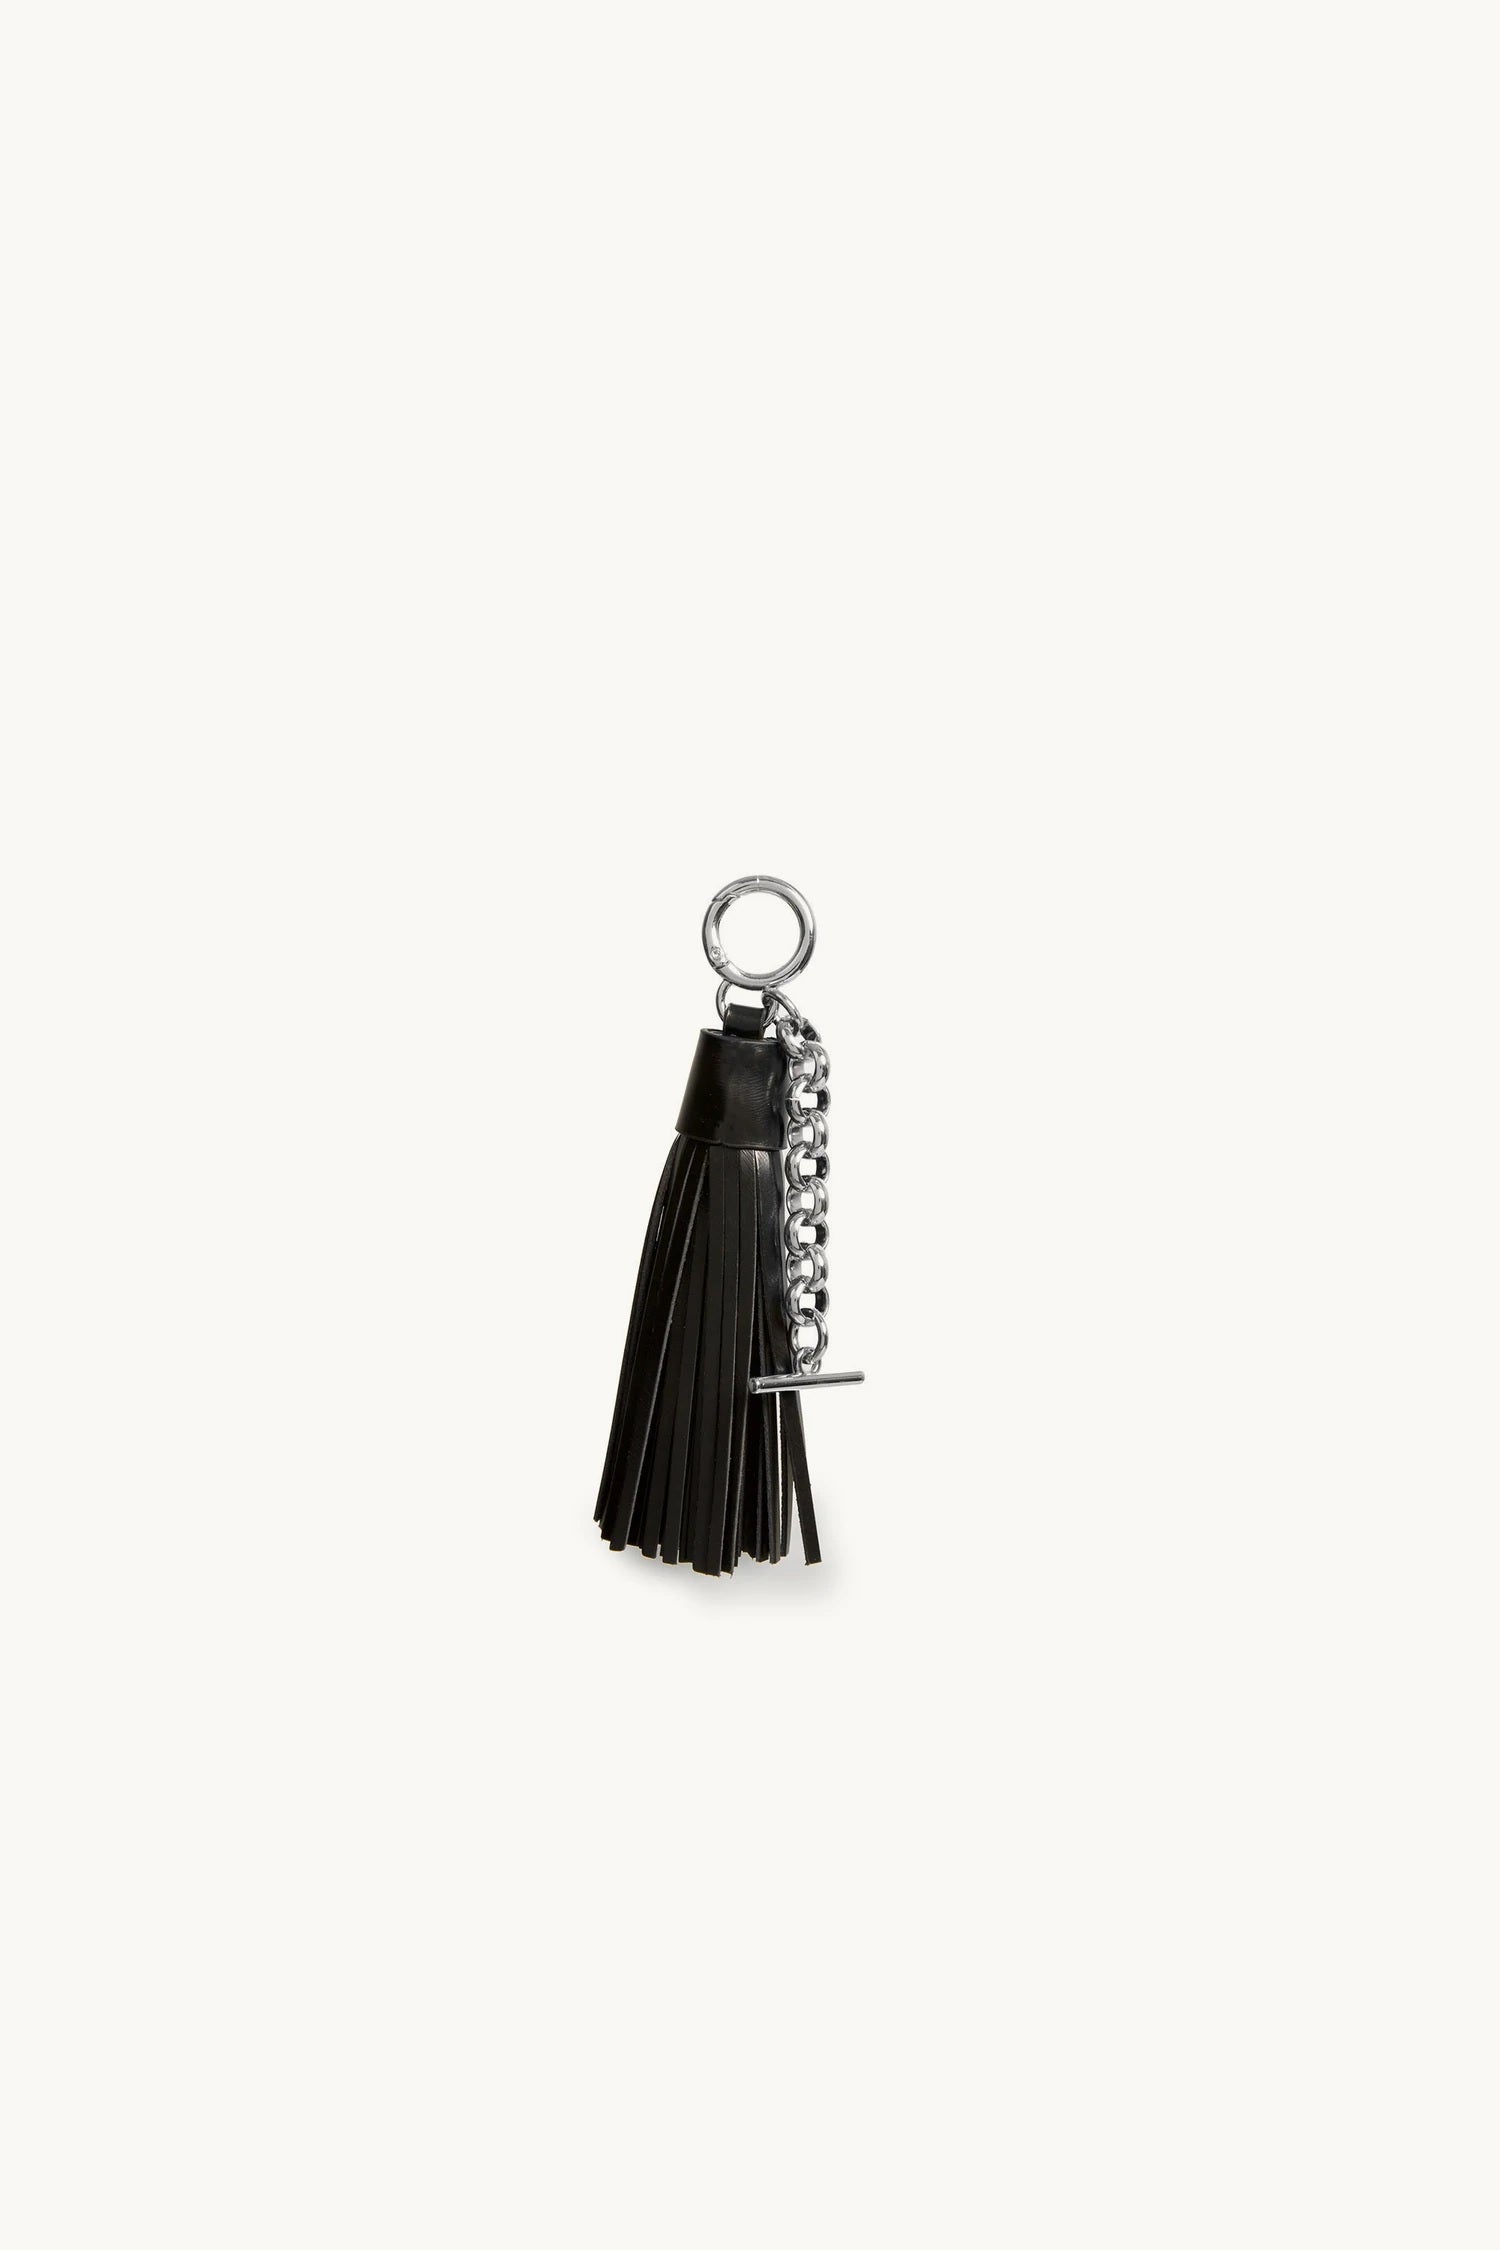 Dylan Kain The Harlow Lux Keychain Black/Silver